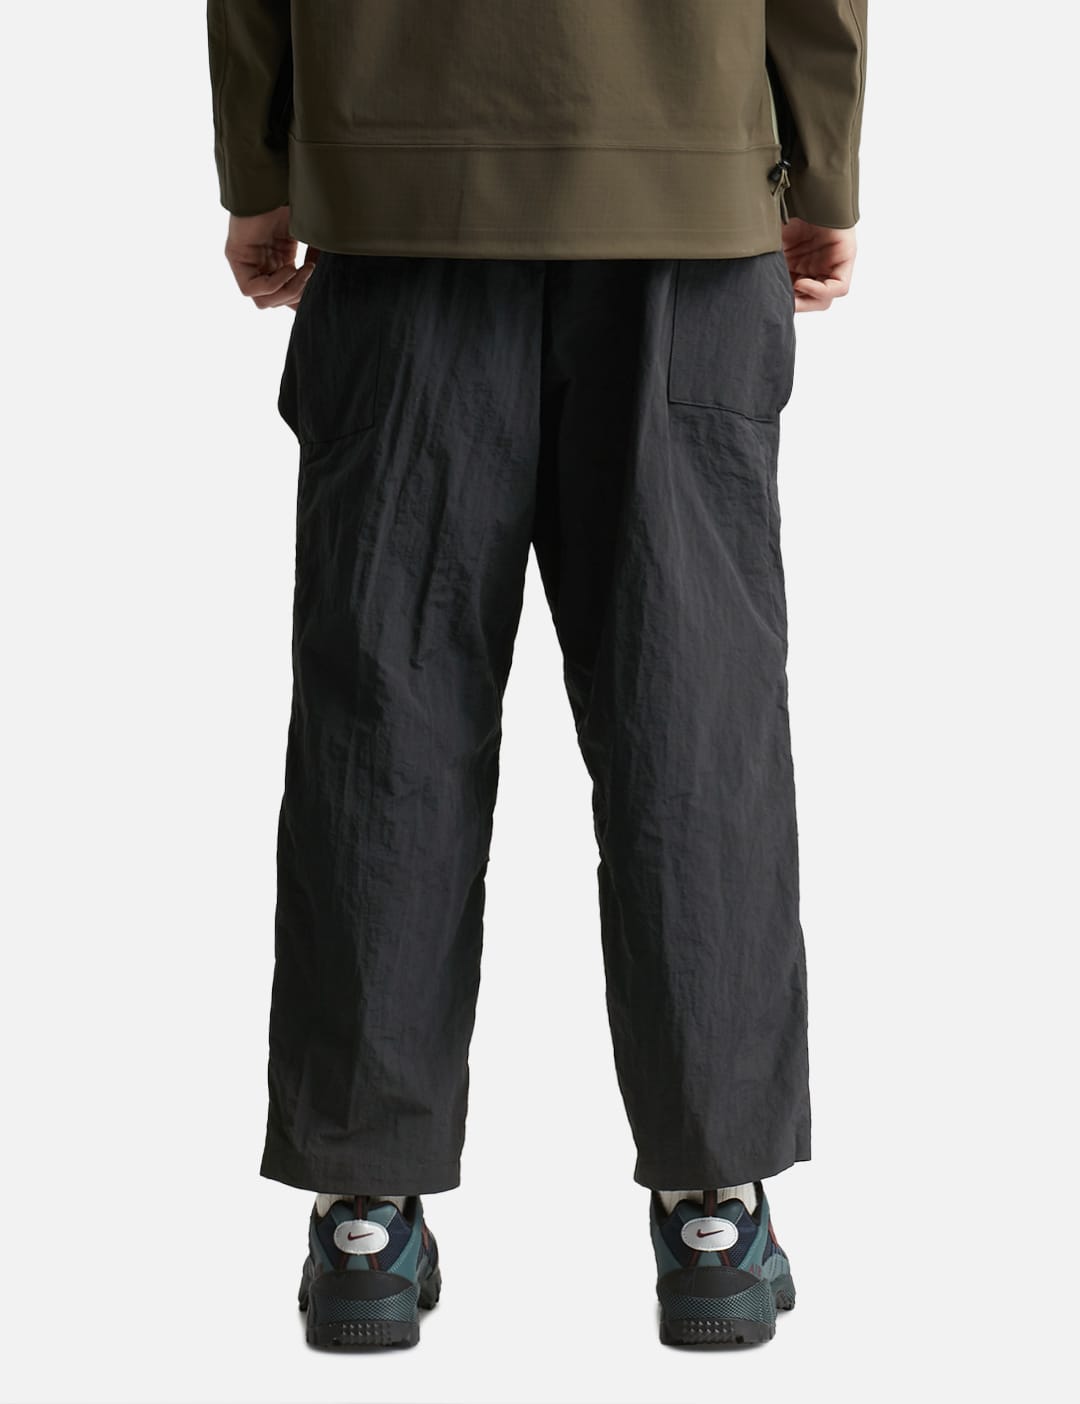 Comfy Outdoor Garment - M65 PANTS | HBX - Globally Curated Fashion